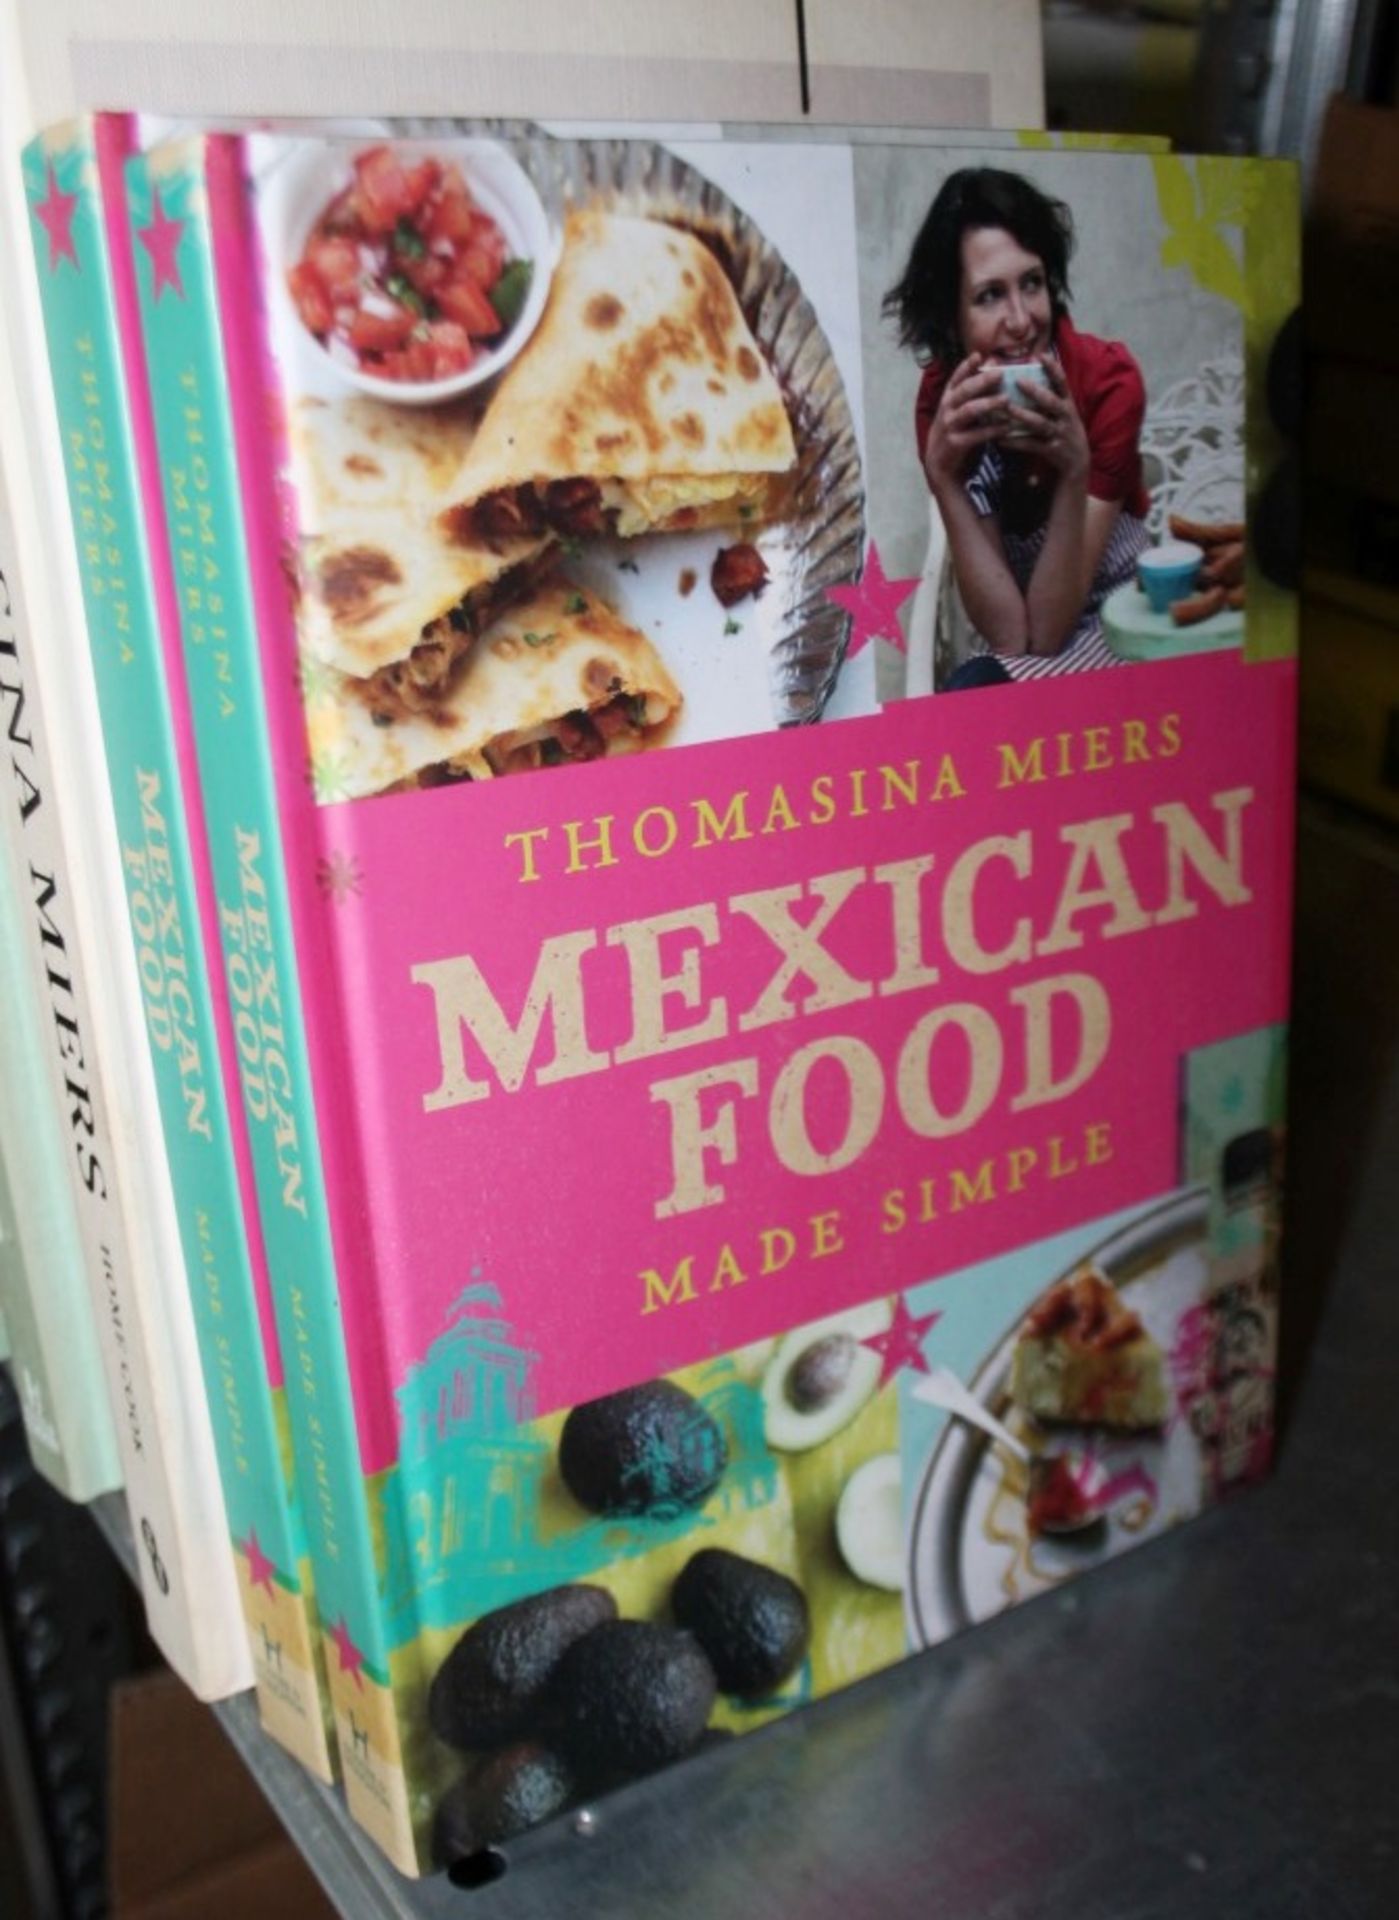 10 x Assorted Cookbooks By Thomasina Miers - Recently Removed From An Well-known Restaurant In - Image 5 of 6